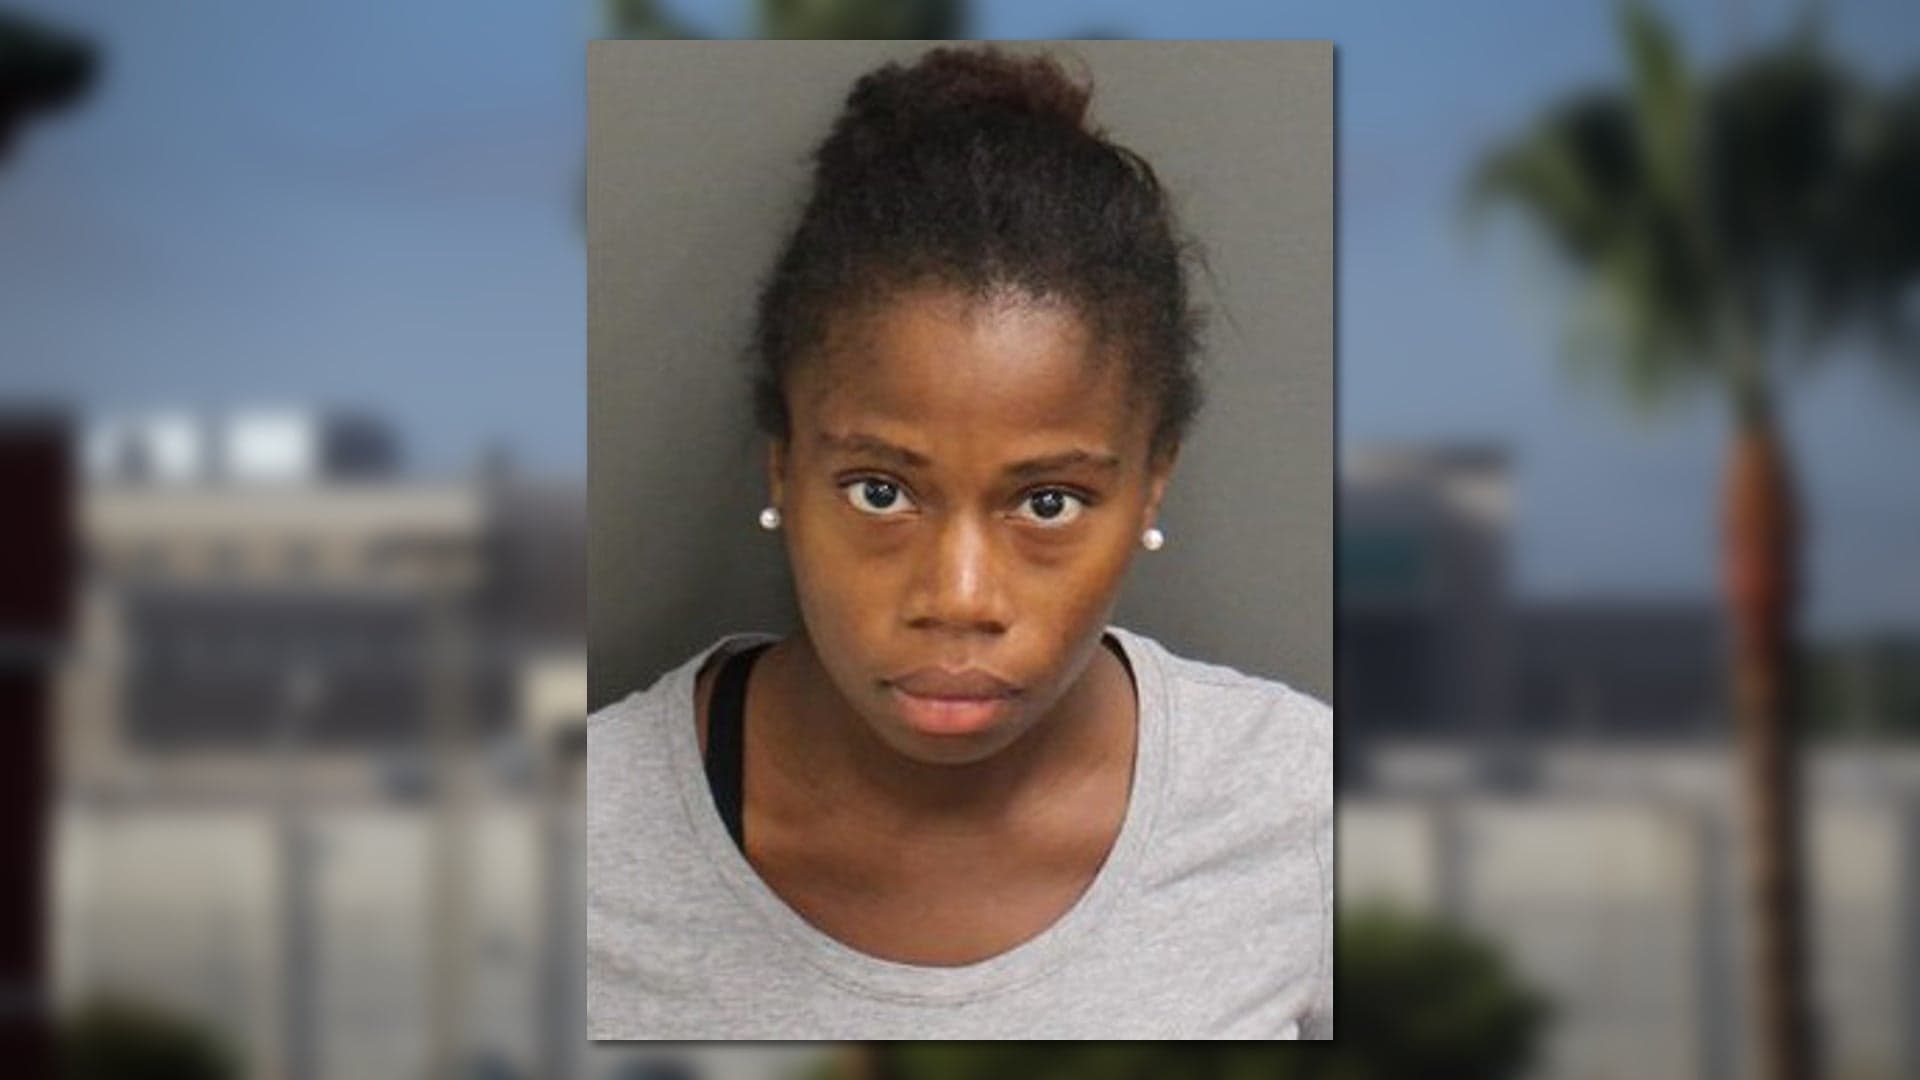 Florida Woman Arrested After Leaving Child in Hot Car in Jail Parking Lot